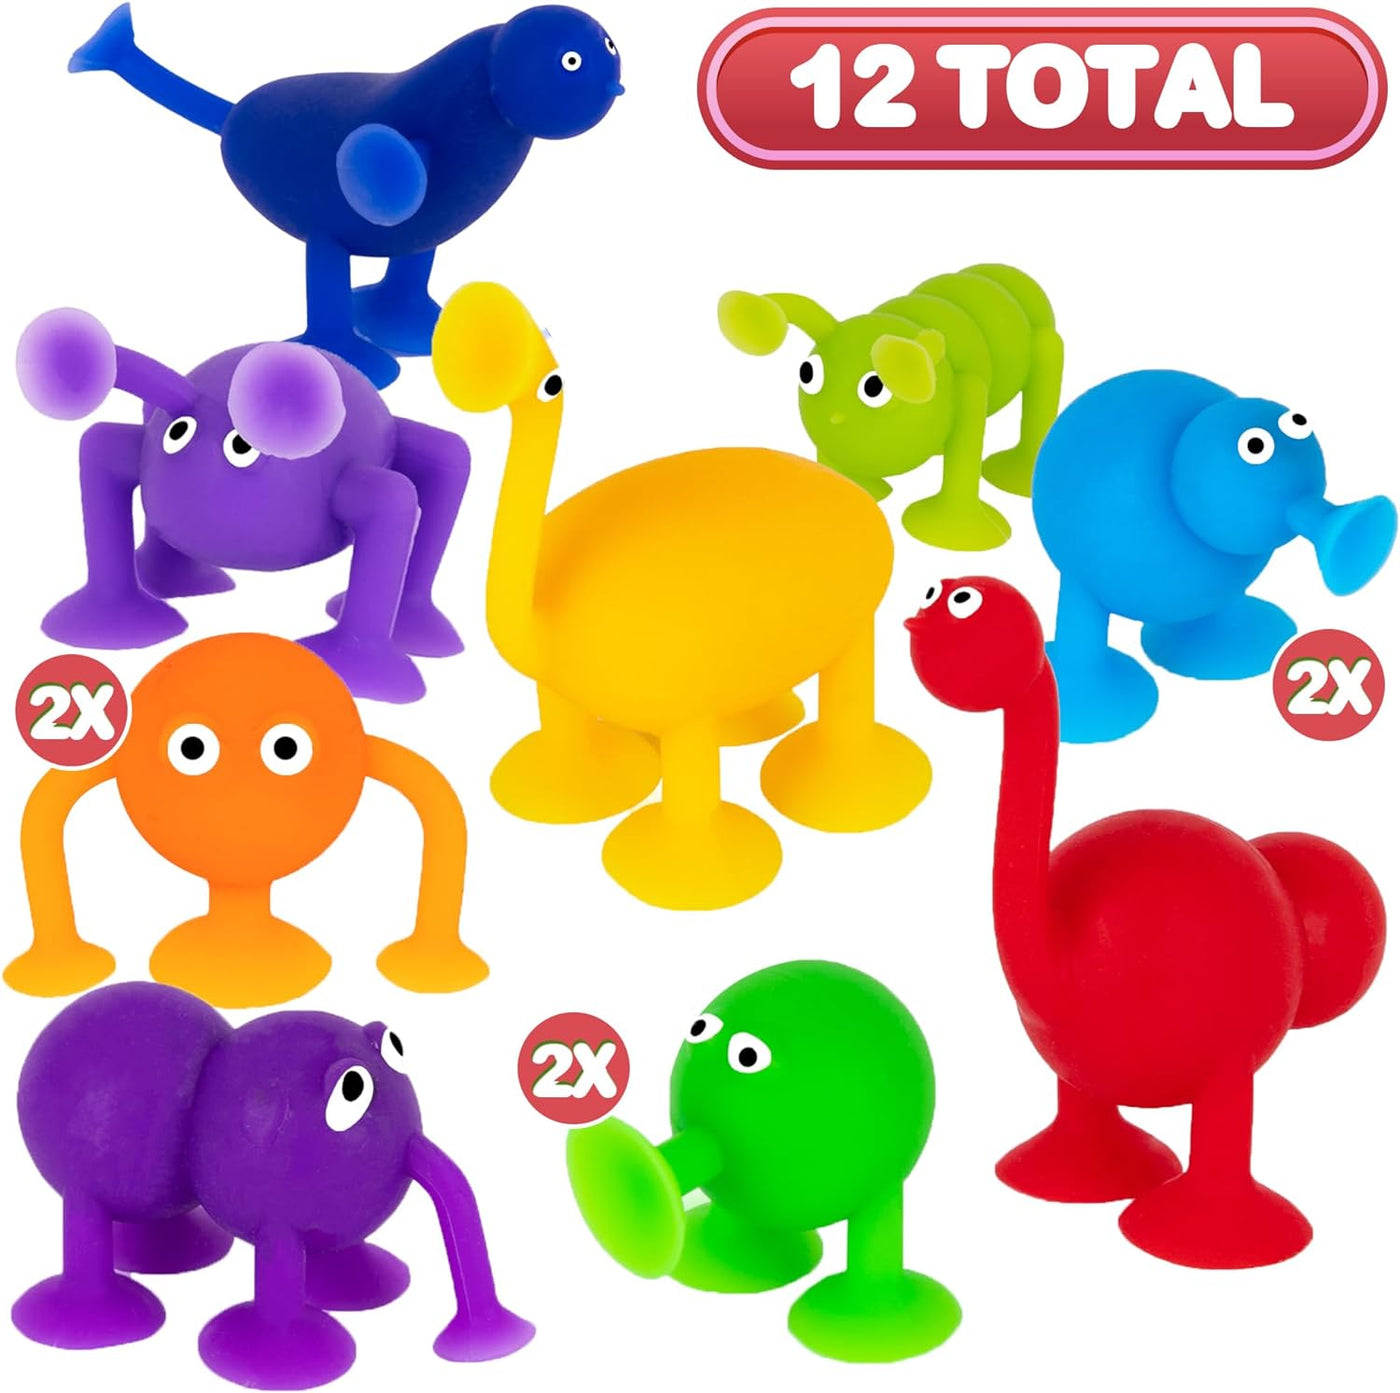 ArtCreativity Suction Creature Bath Toys for Kids - Set of 12 Suction Cup Toys - Mold Free Bath Toys in Assorted Colors and Shapes - Suction Bath Toys for Babies - Cool Creatures for Baththub Play